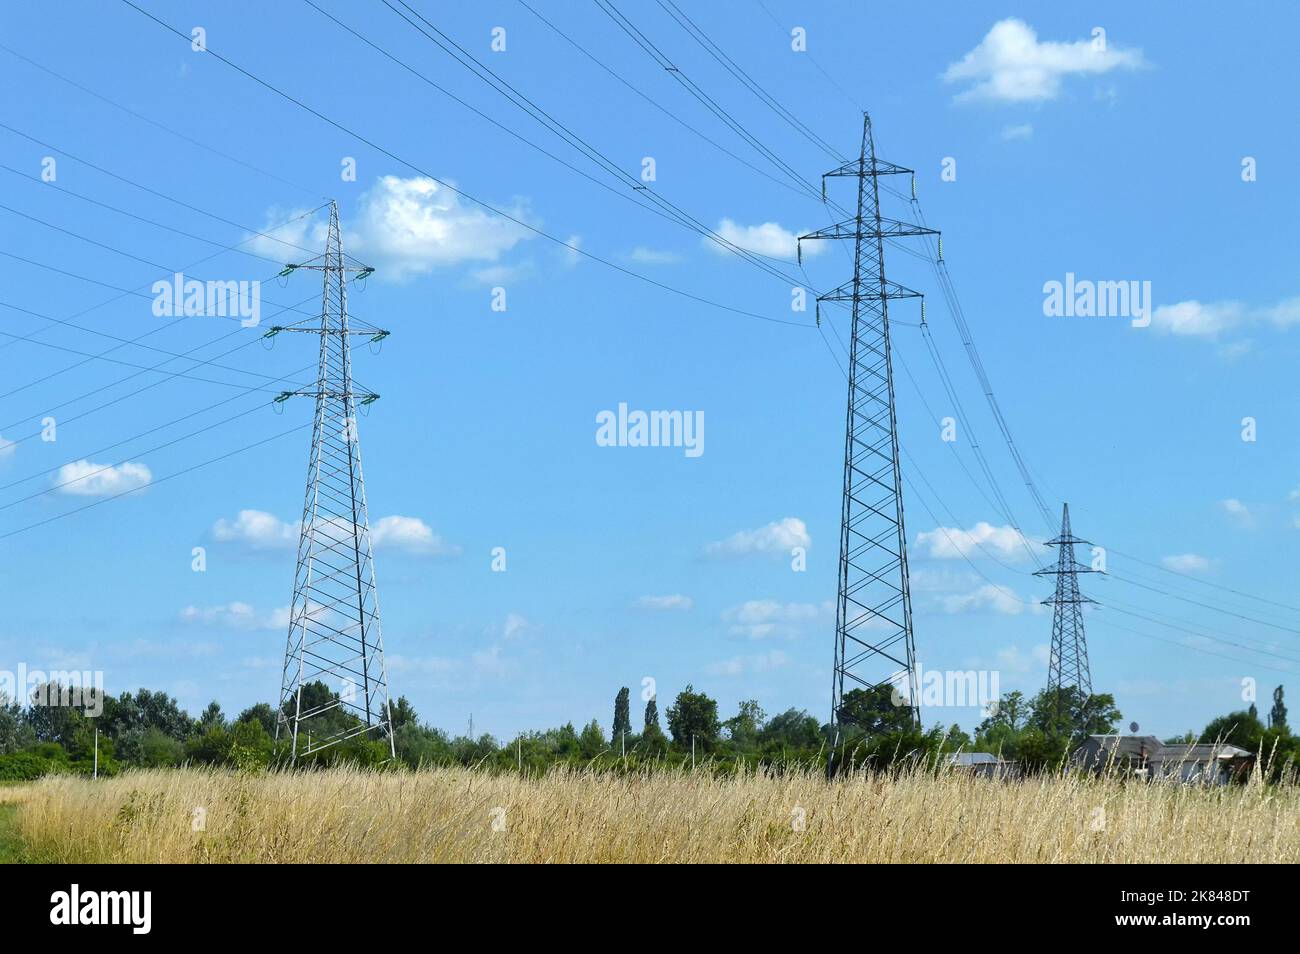 Transmission towers carrying high voltage electric power lines. Electricity pylons in the field Stock Photo